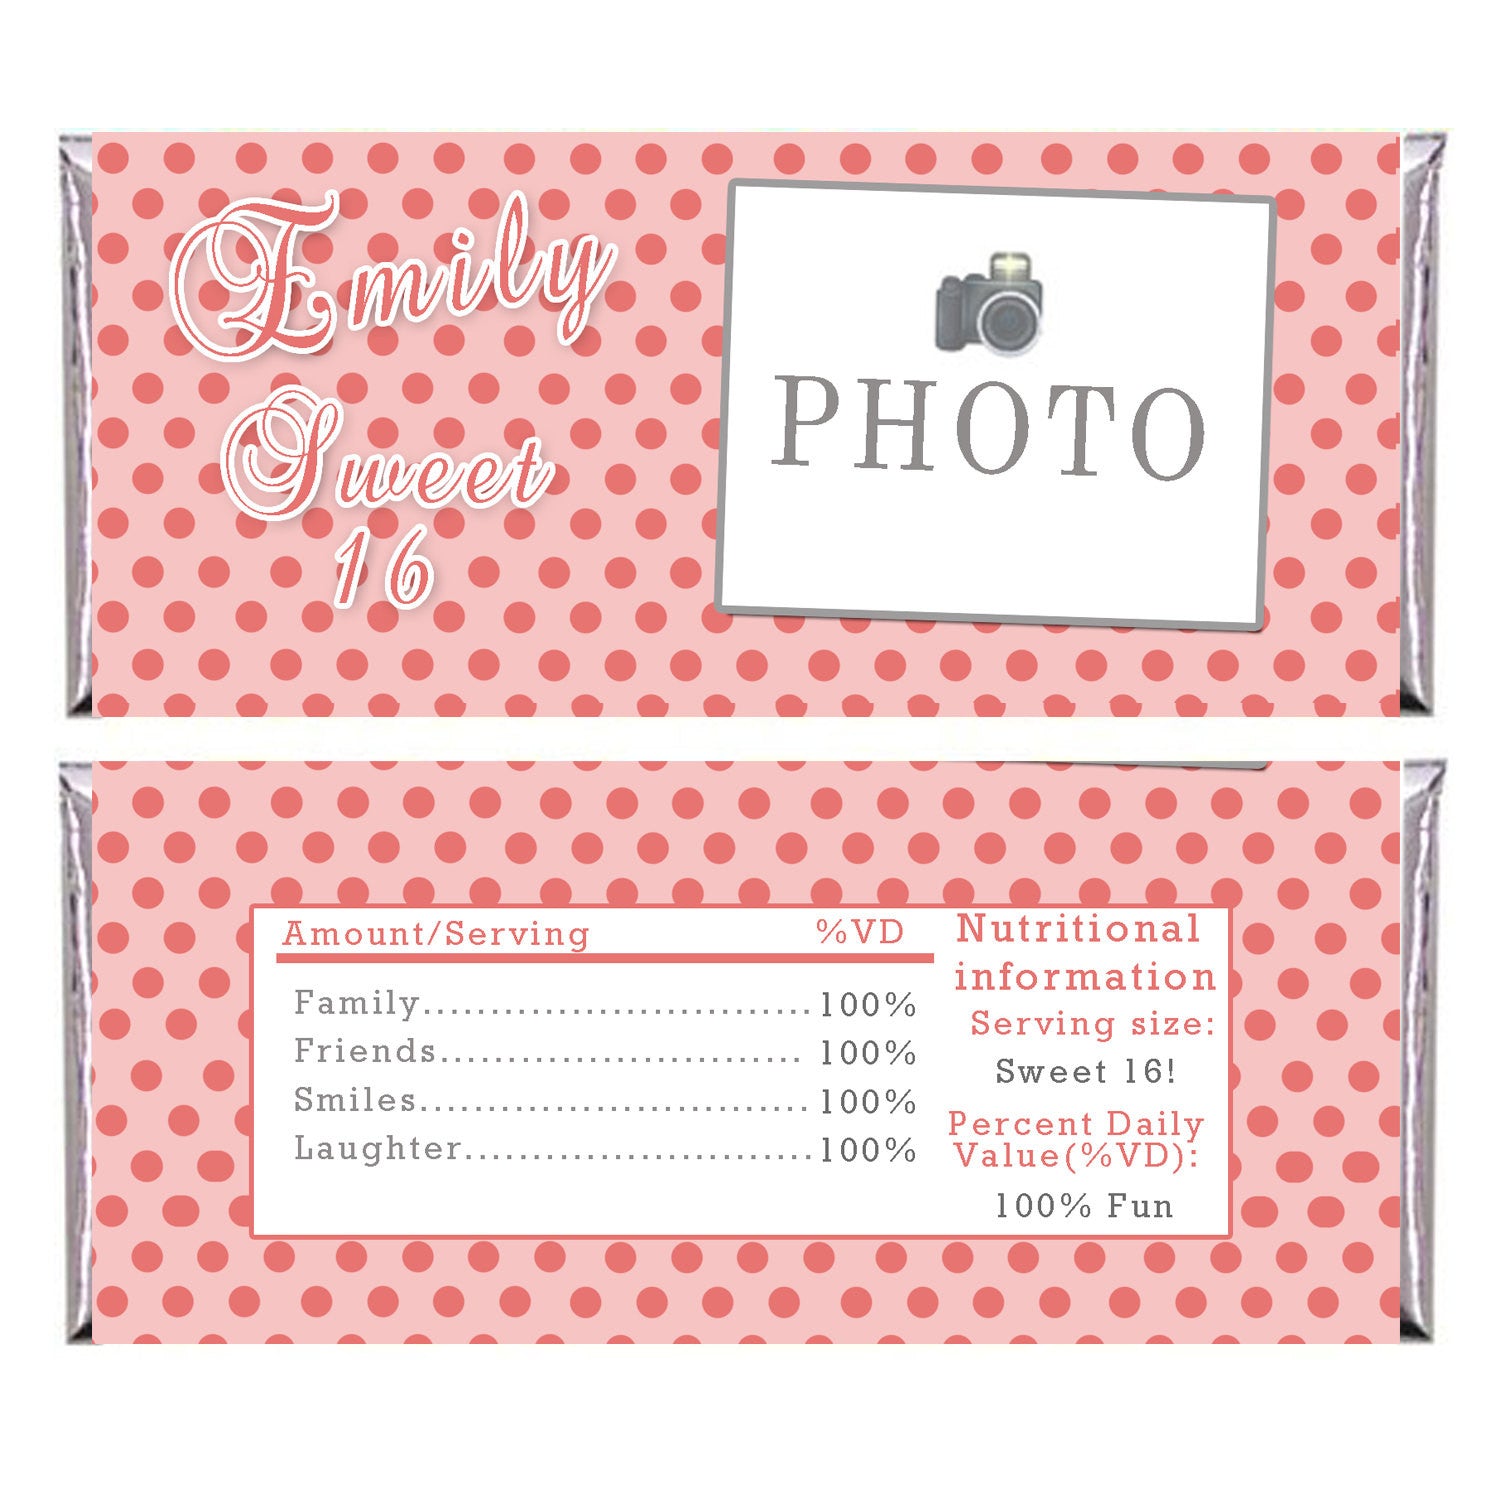 Candy bar wrapper sweet 16 birthday with picture